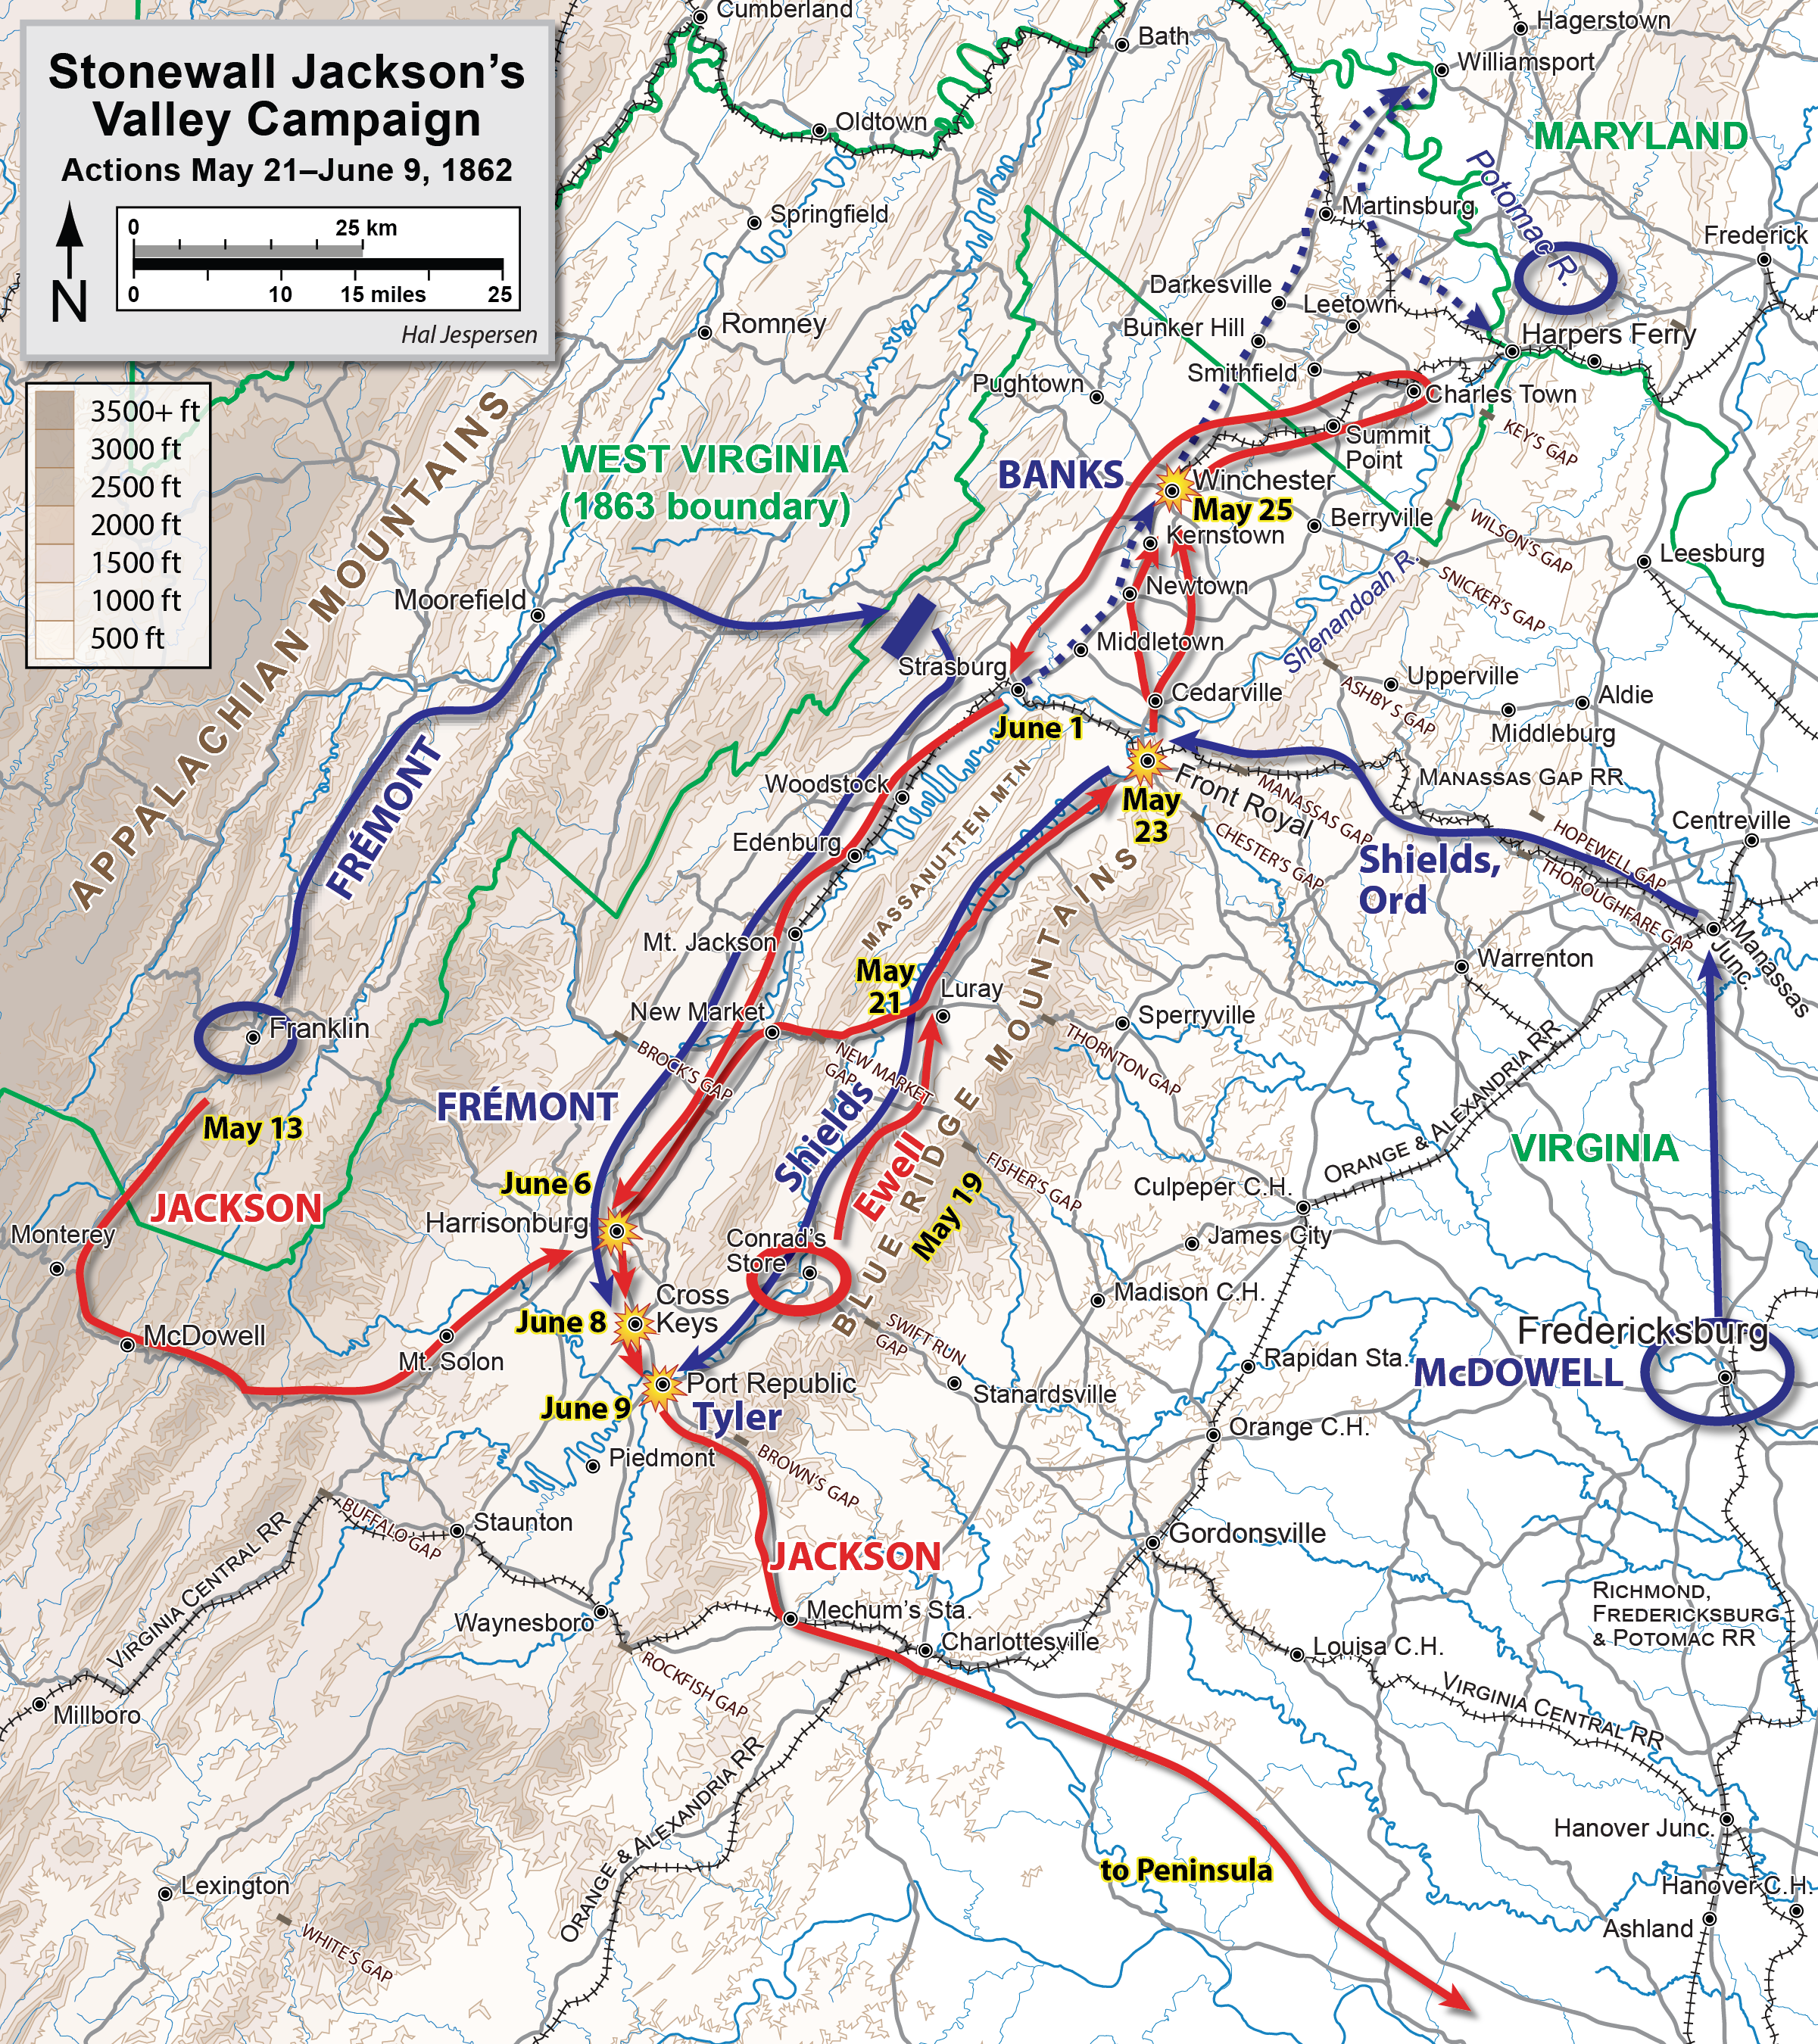 A map depicts army movements during a Civil War campaign.